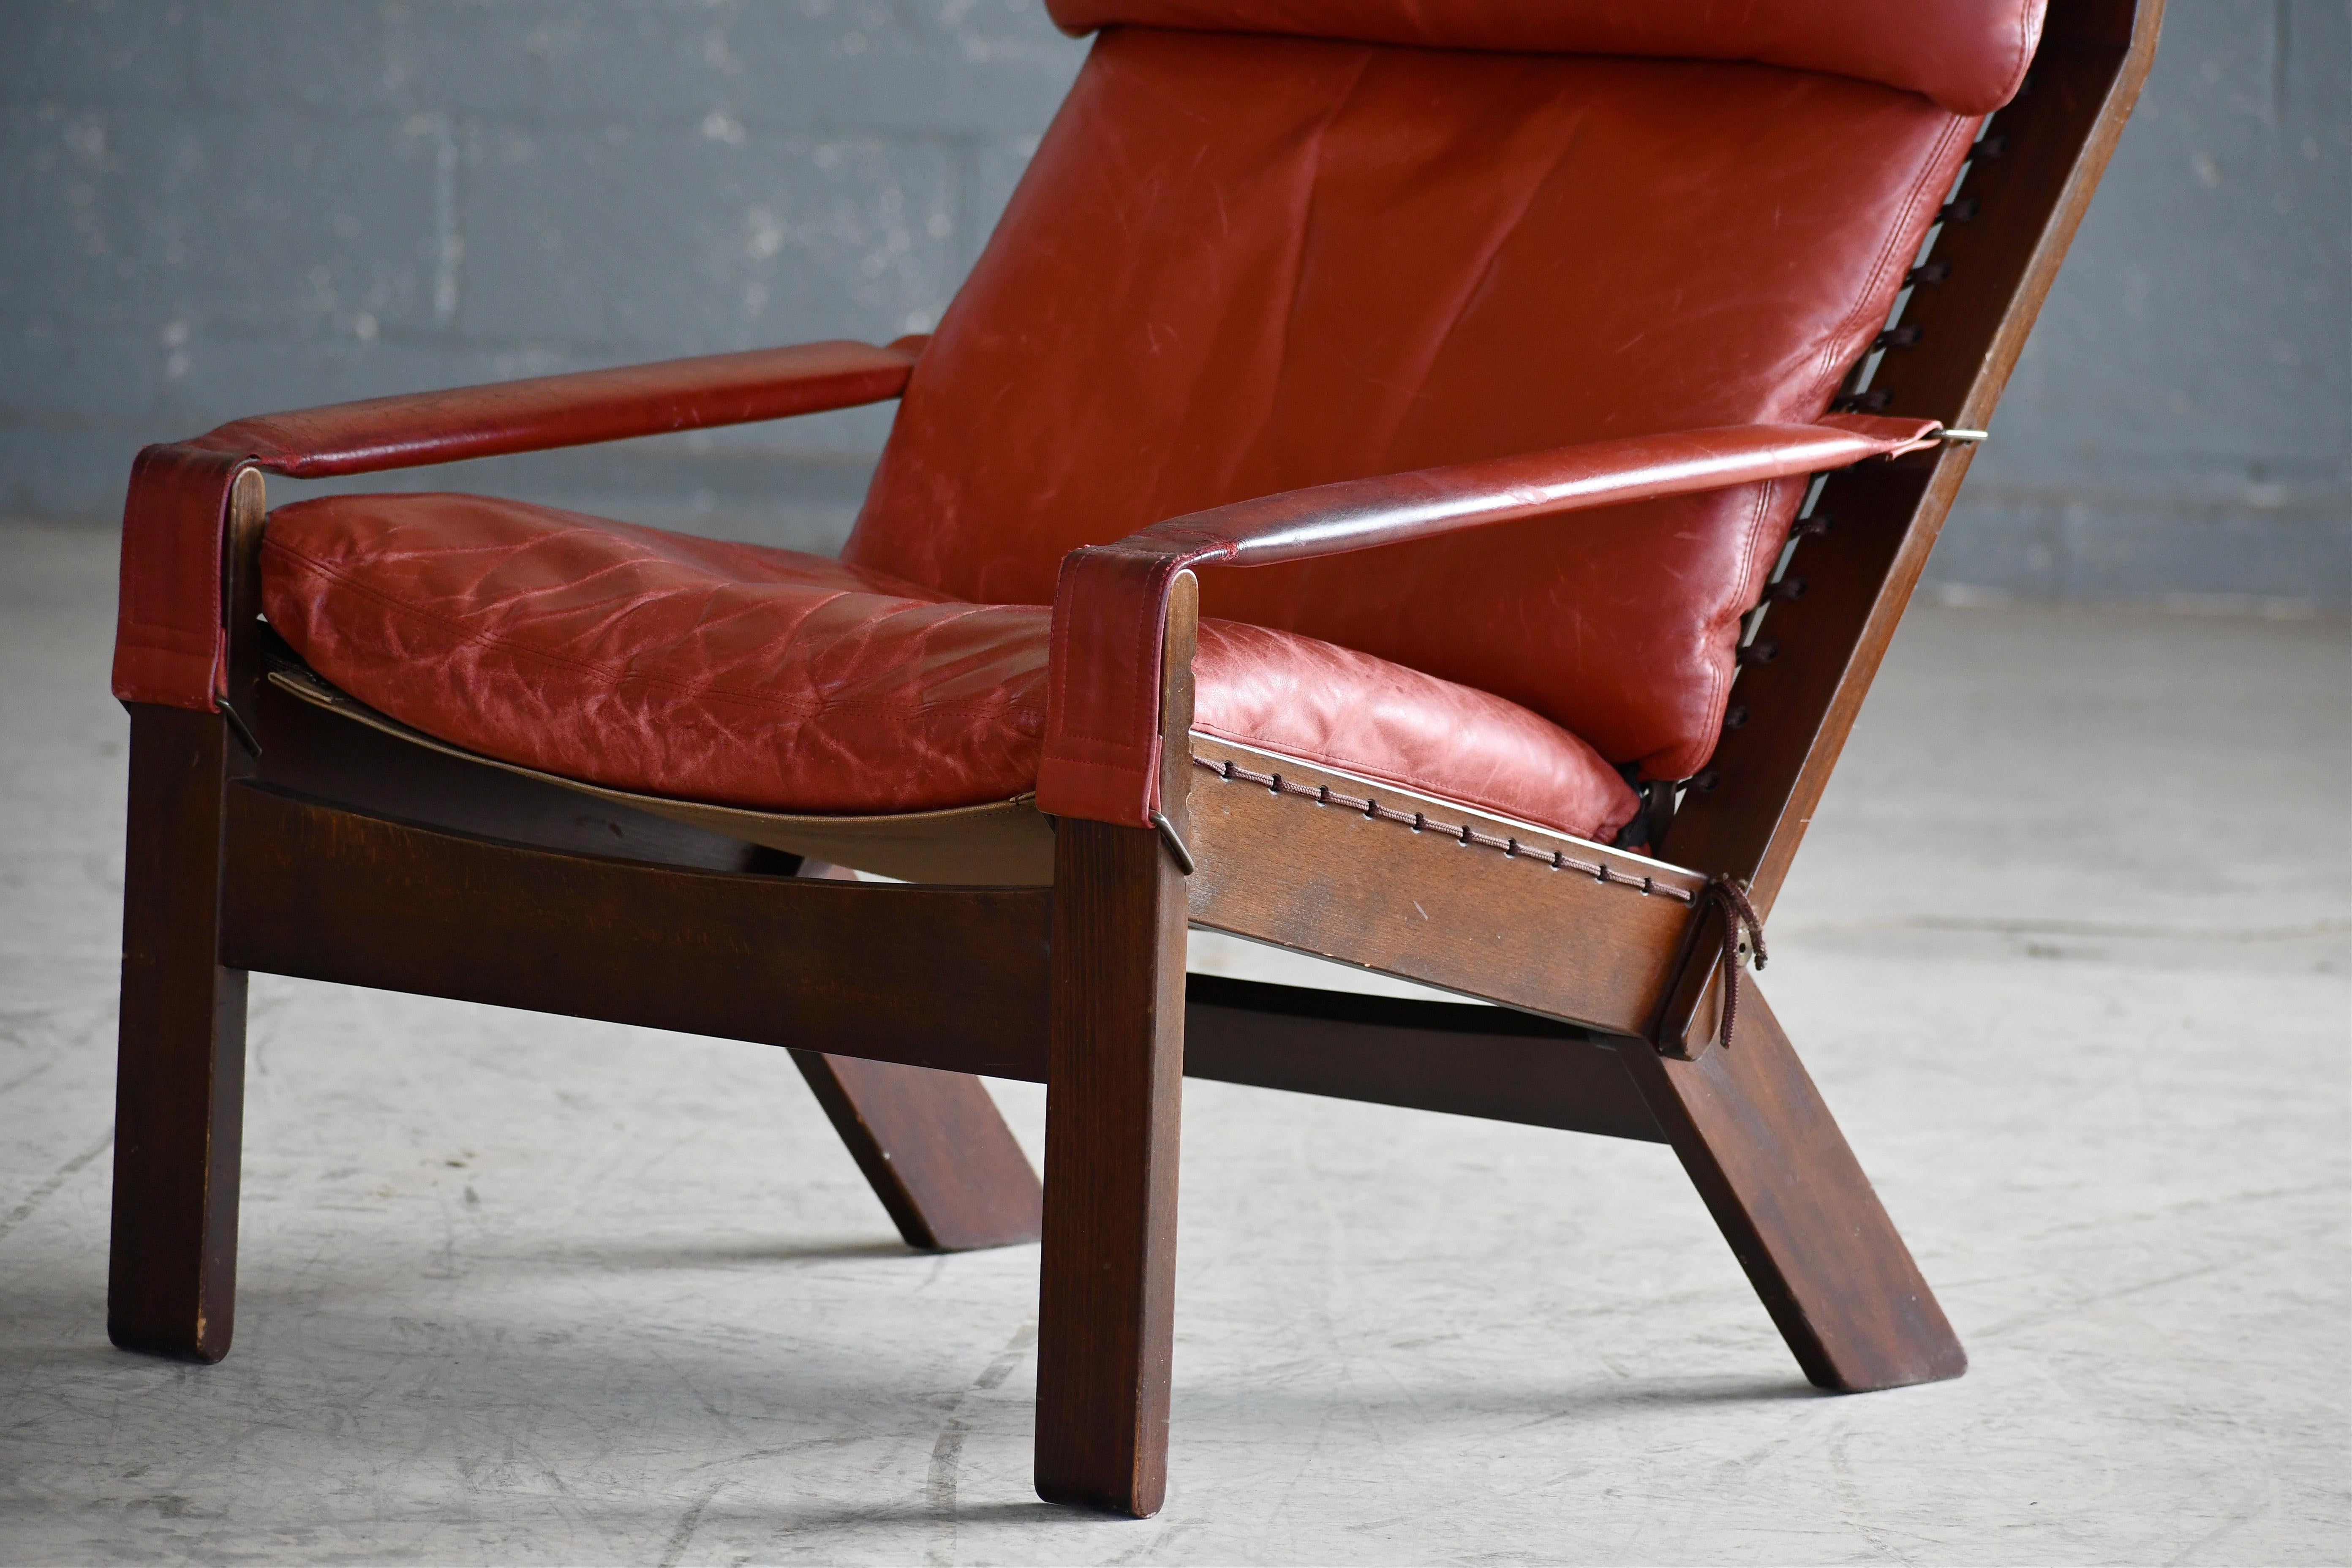 Norwegian Highback Safari Style Lounge Chair by Torbjorn Afdal in Brick Red Leather